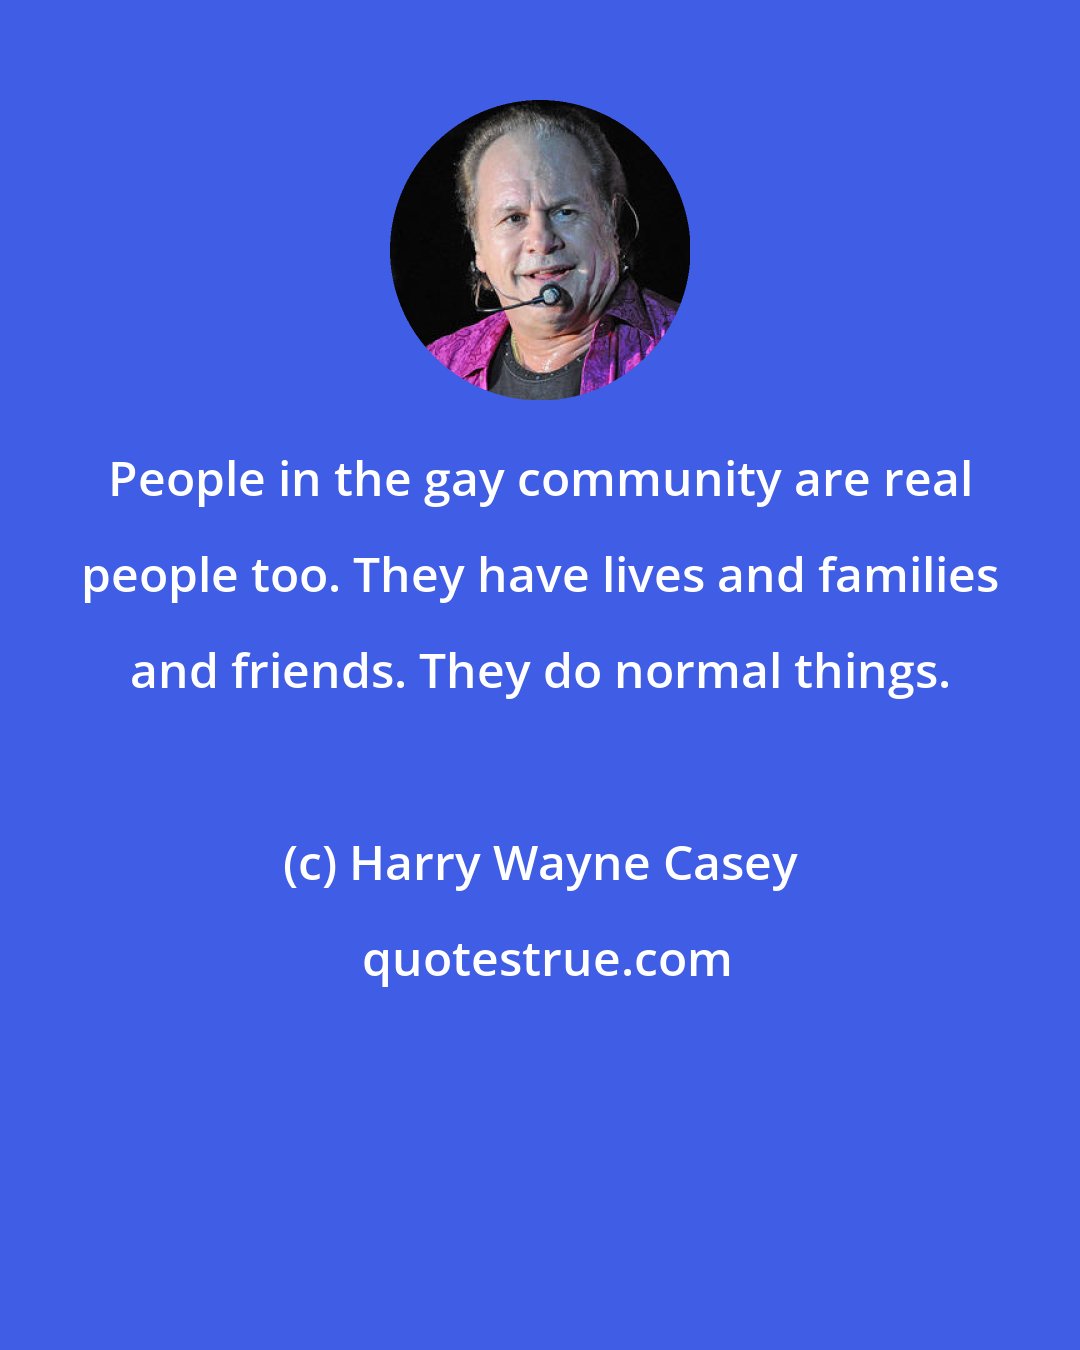 Harry Wayne Casey: People in the gay community are real people too. They have lives and families and friends. They do normal things.